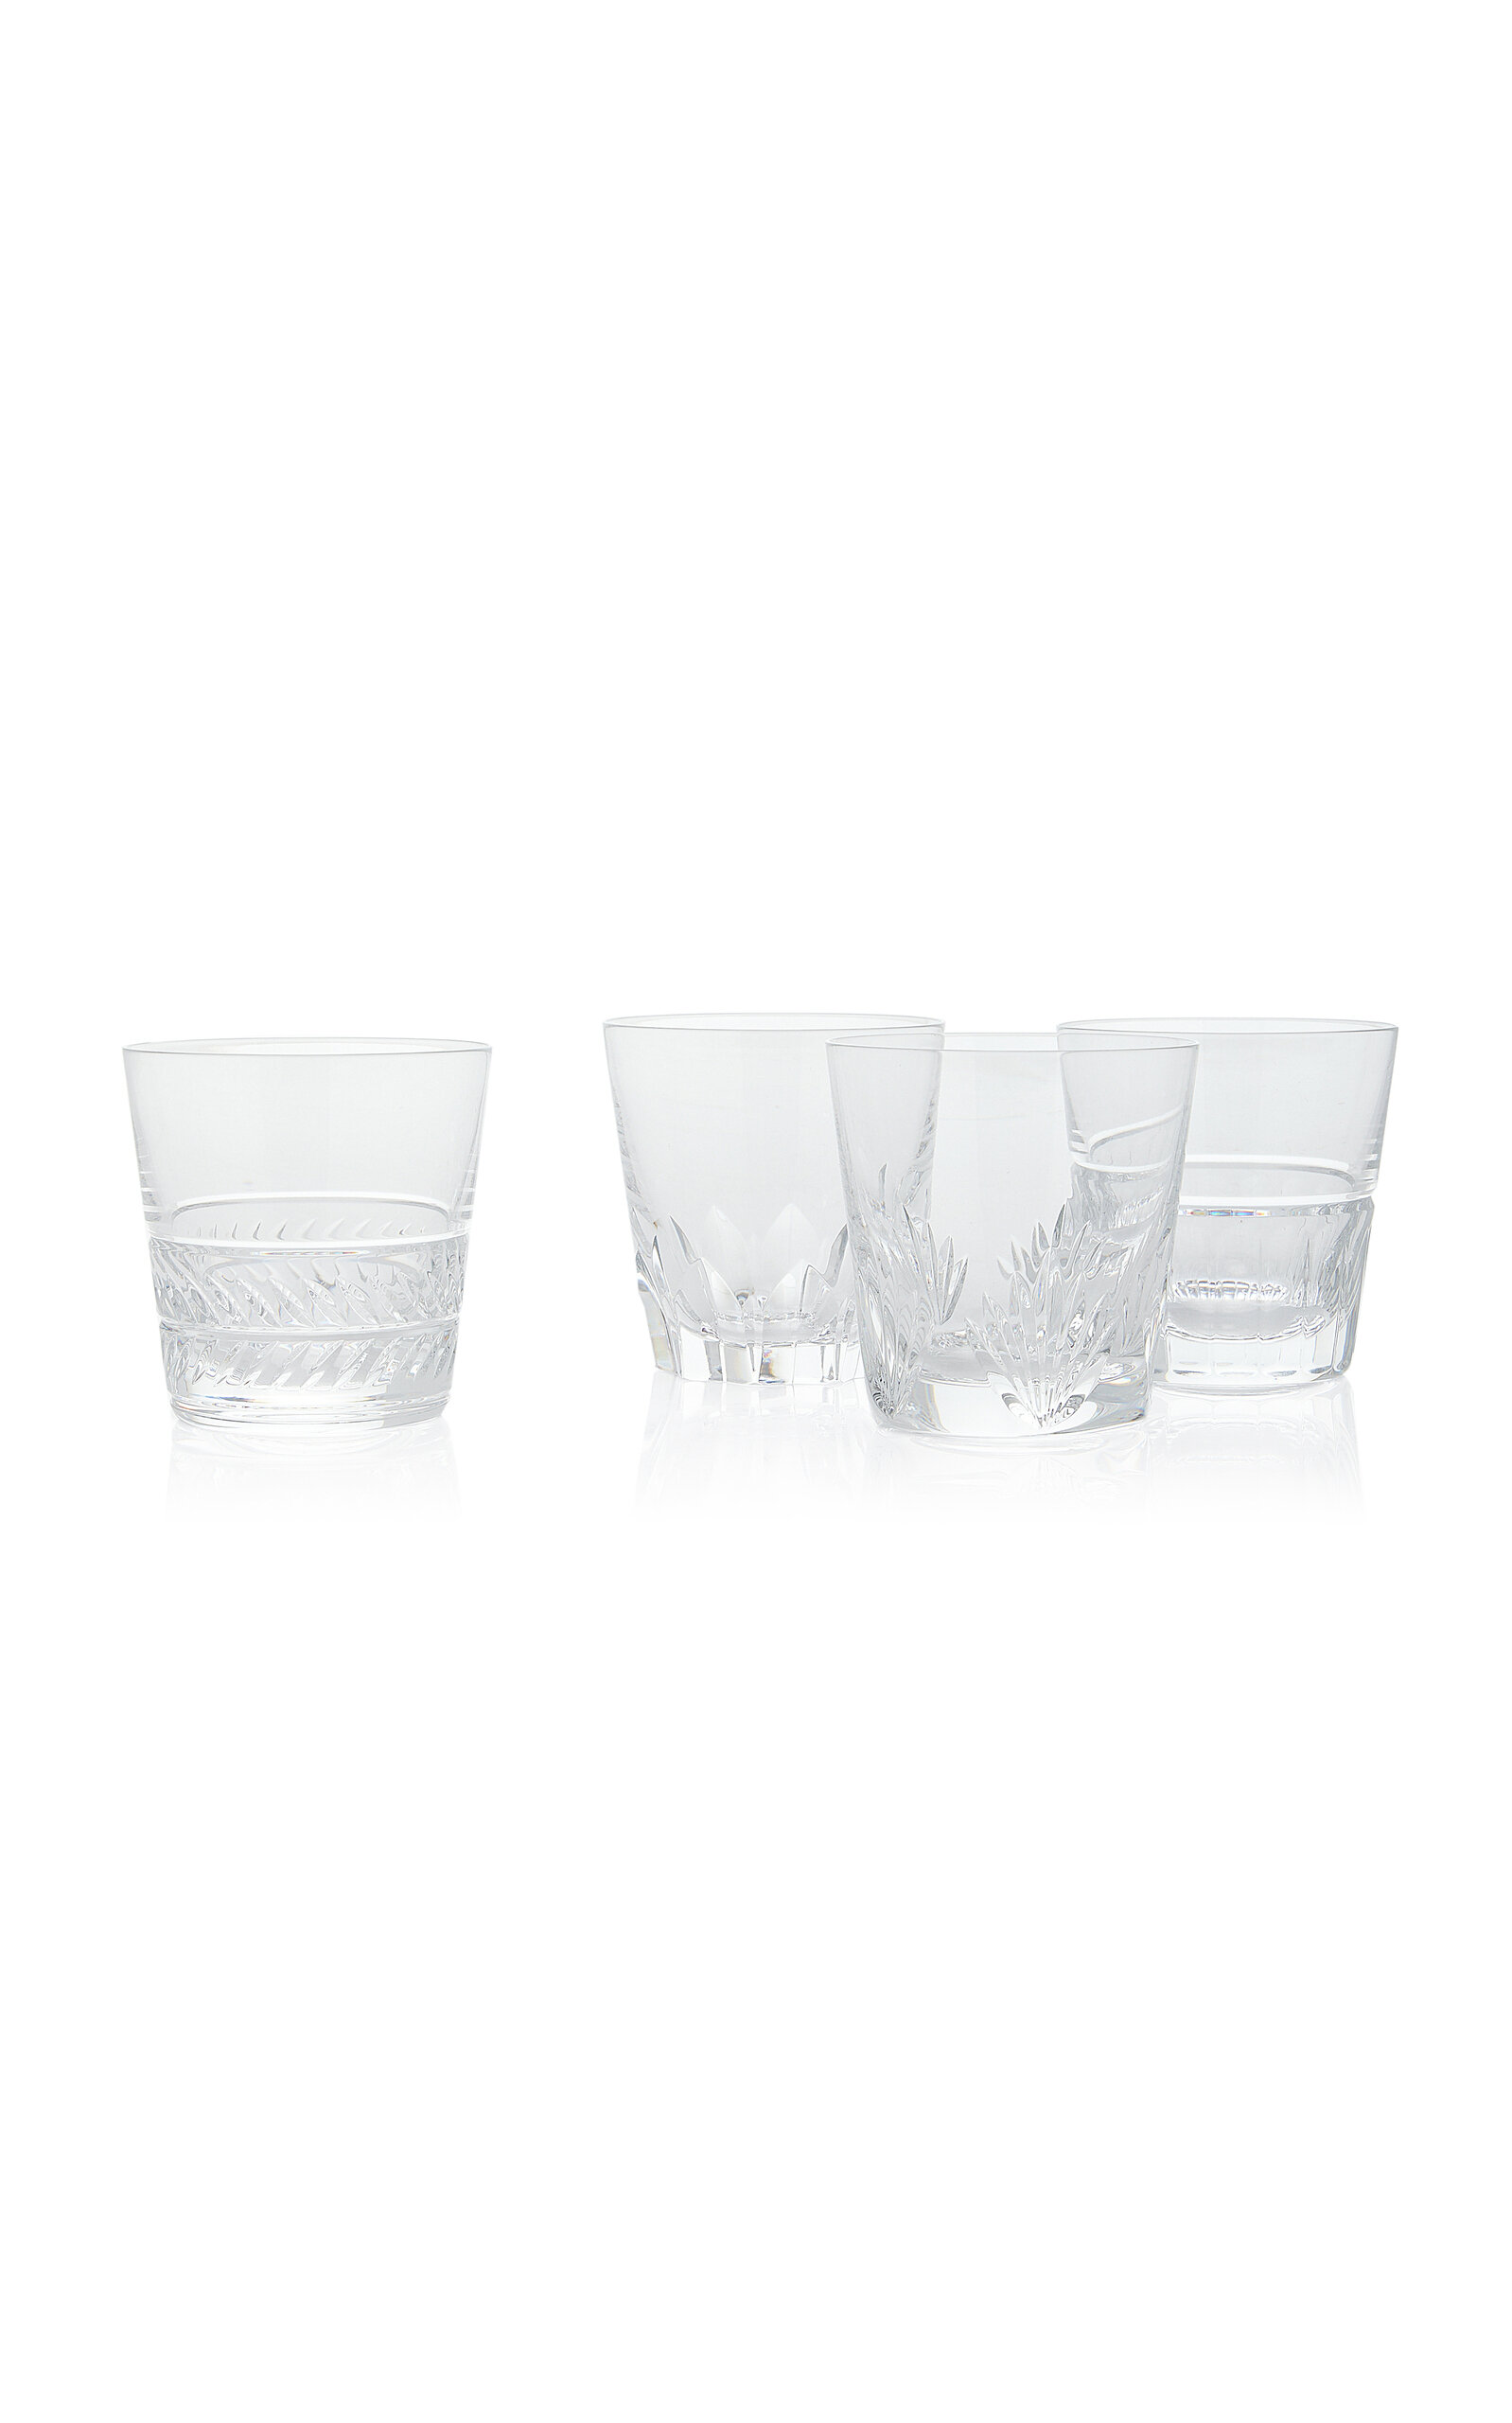 Saint-louis King's Hall Set-of-four Crystal Tumblers In Transparent